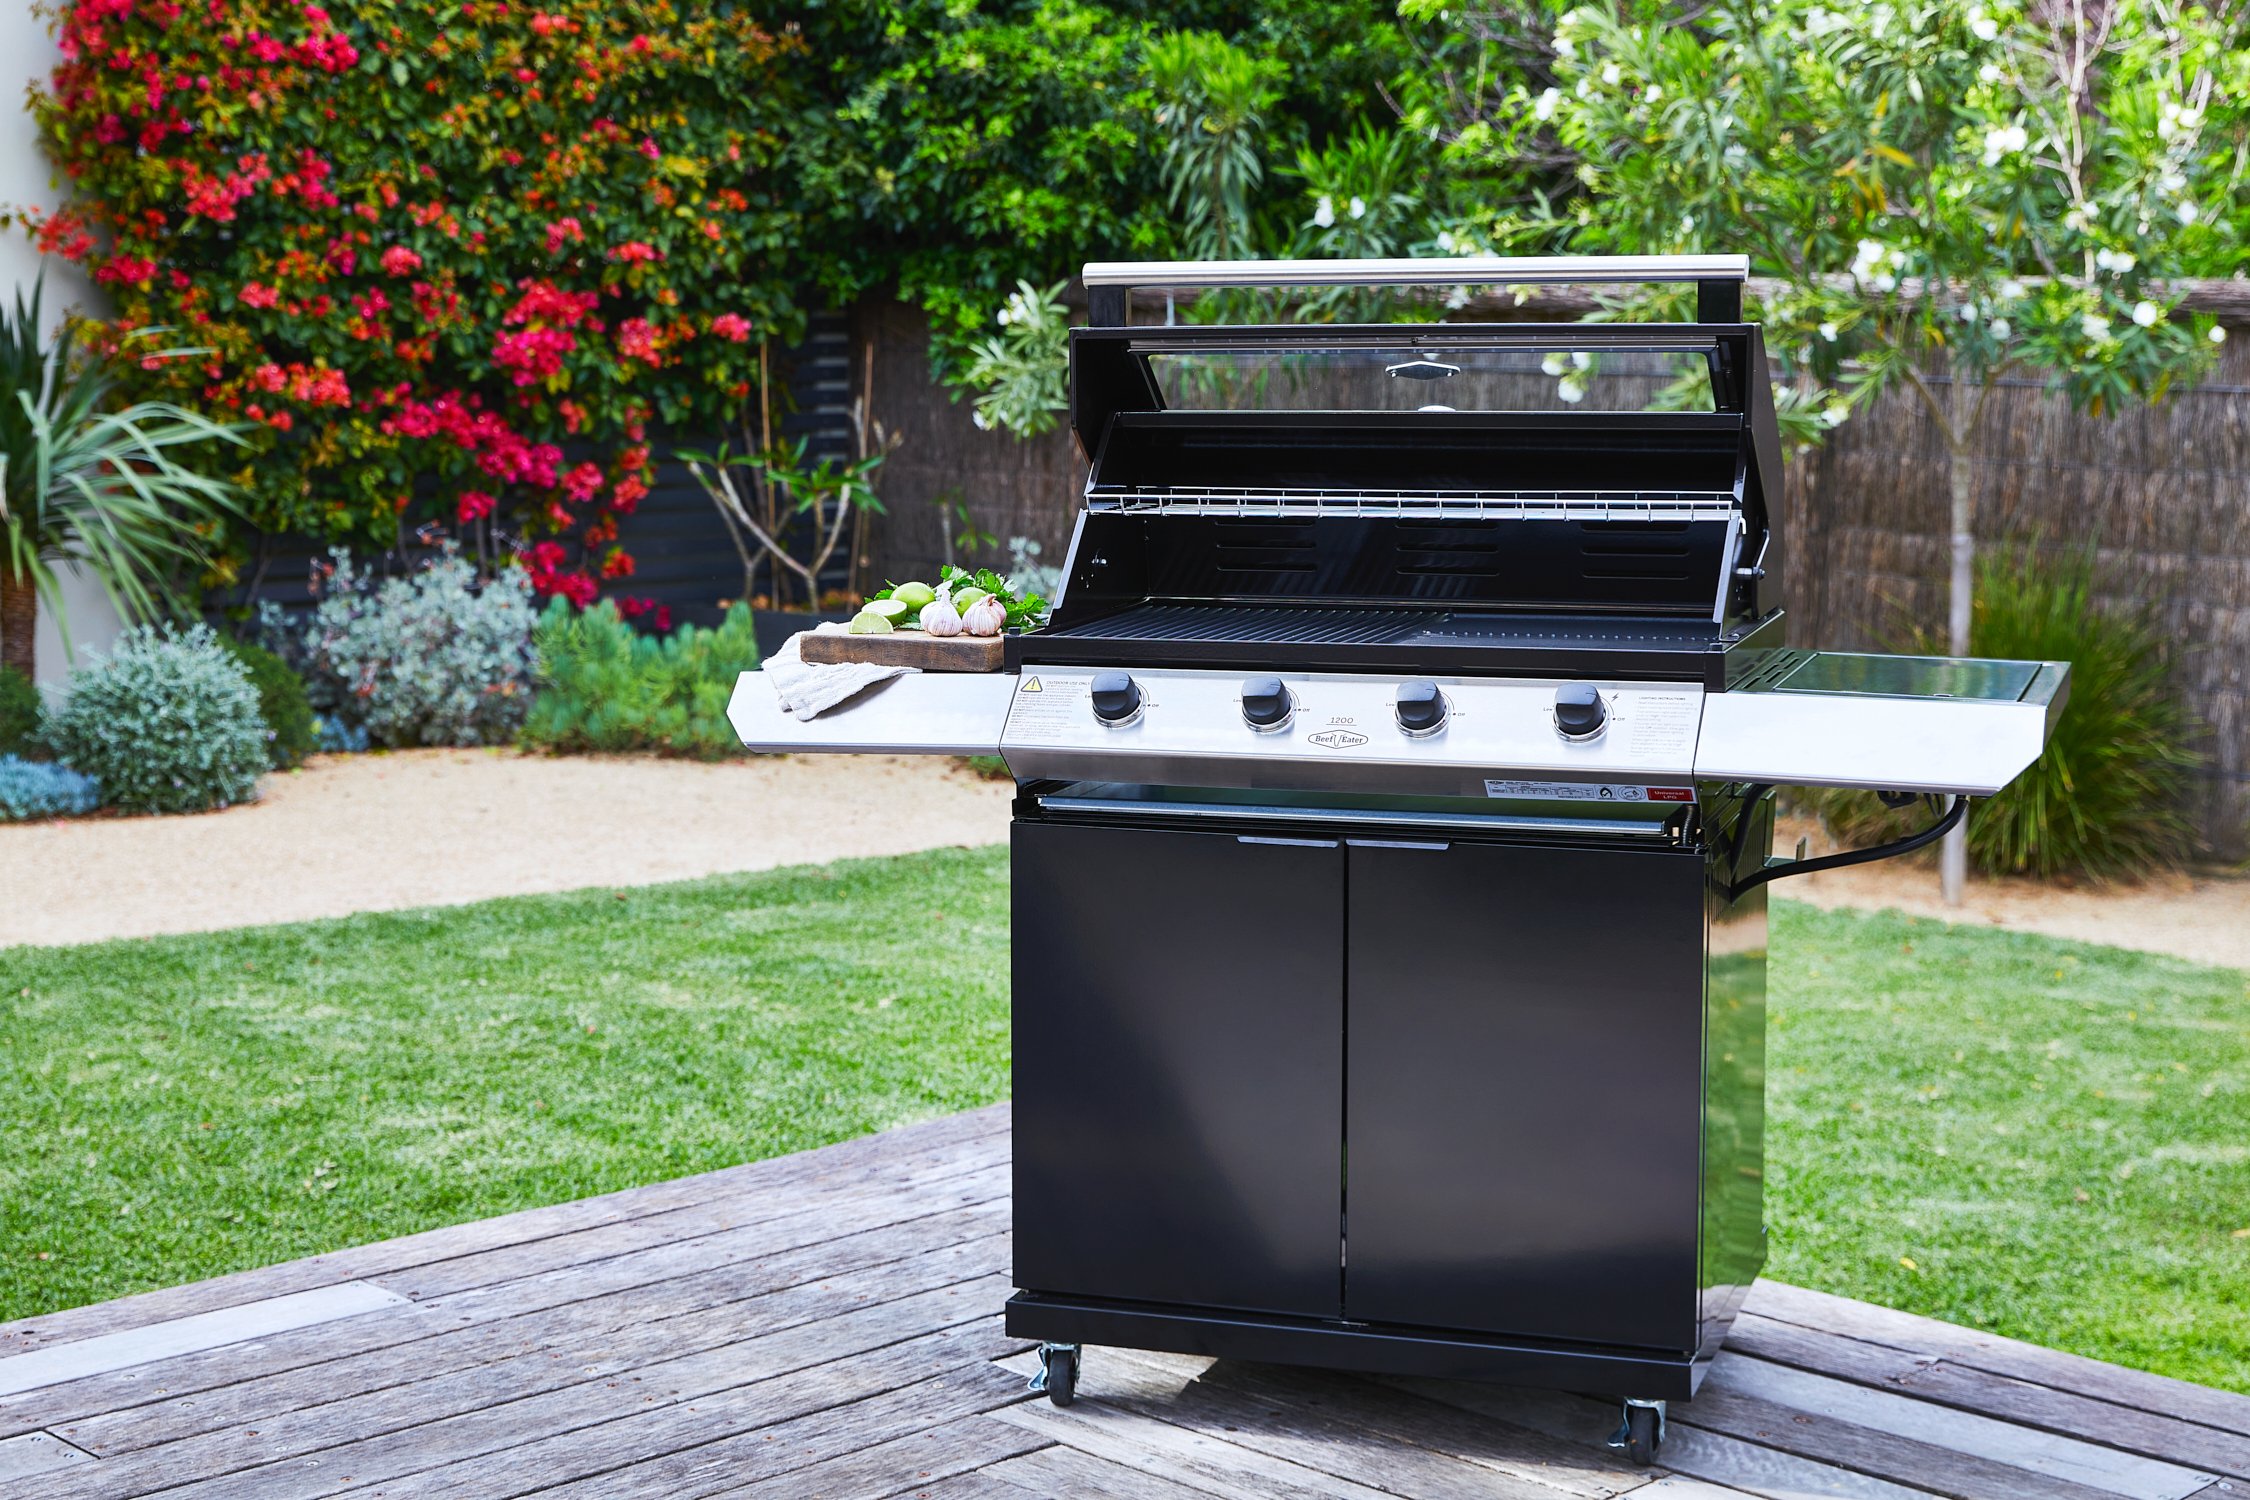 BEEFEATER 1200 SERIES GAS BBQ 4 BURNERS & 1 SIDE BURNER WITH TROLLEY